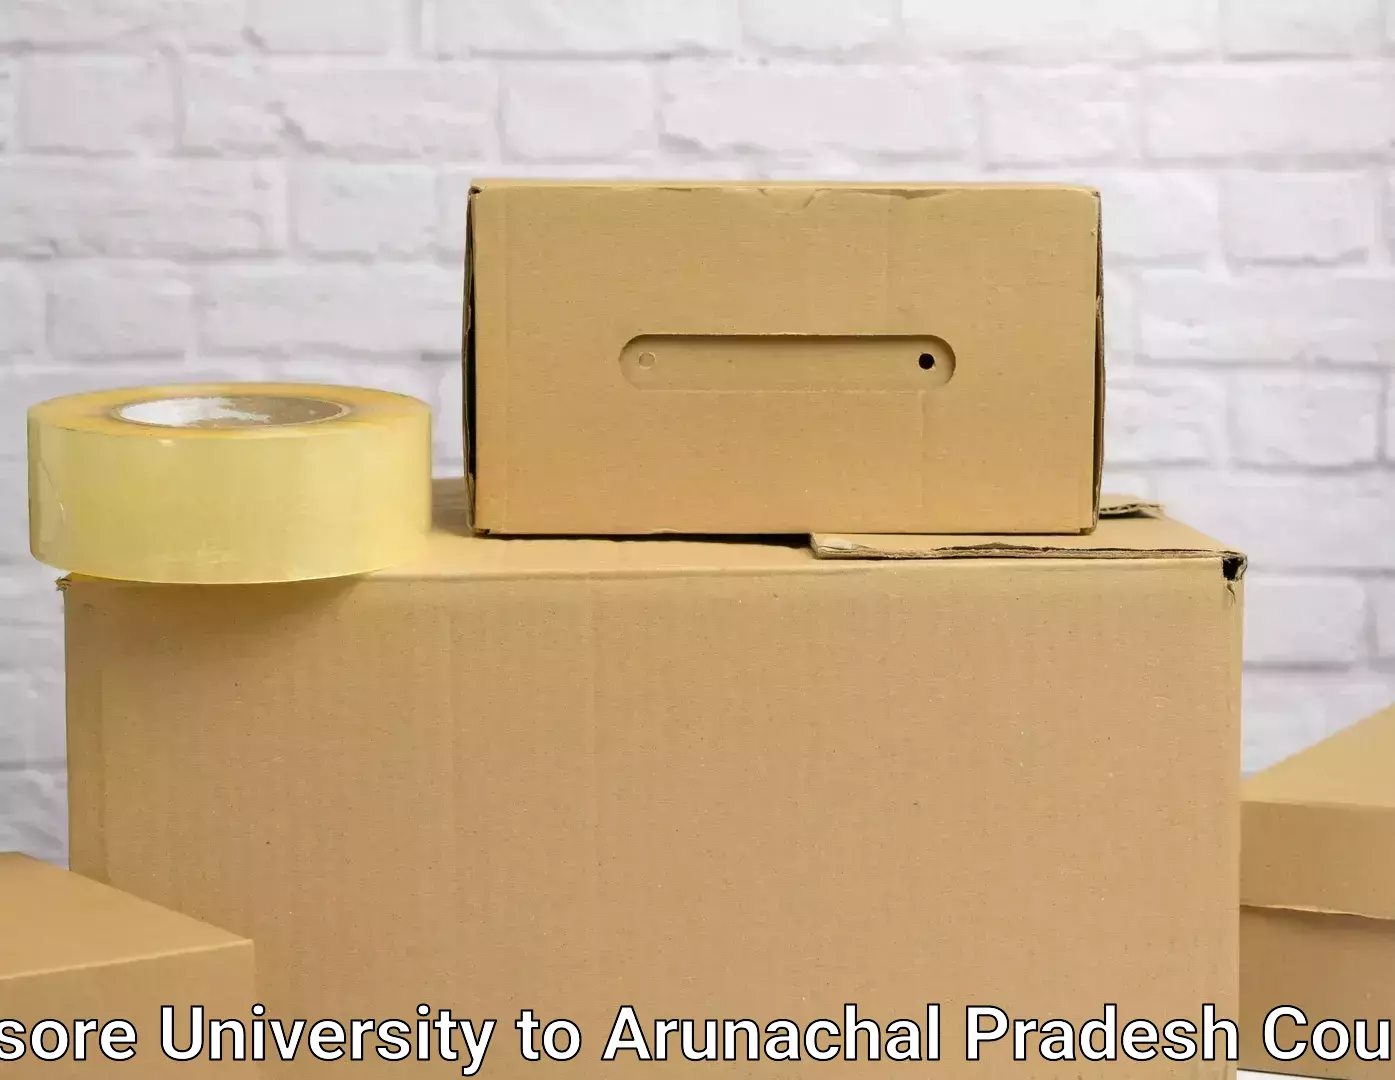 Home shifting services in Mysore University to Naharlagun